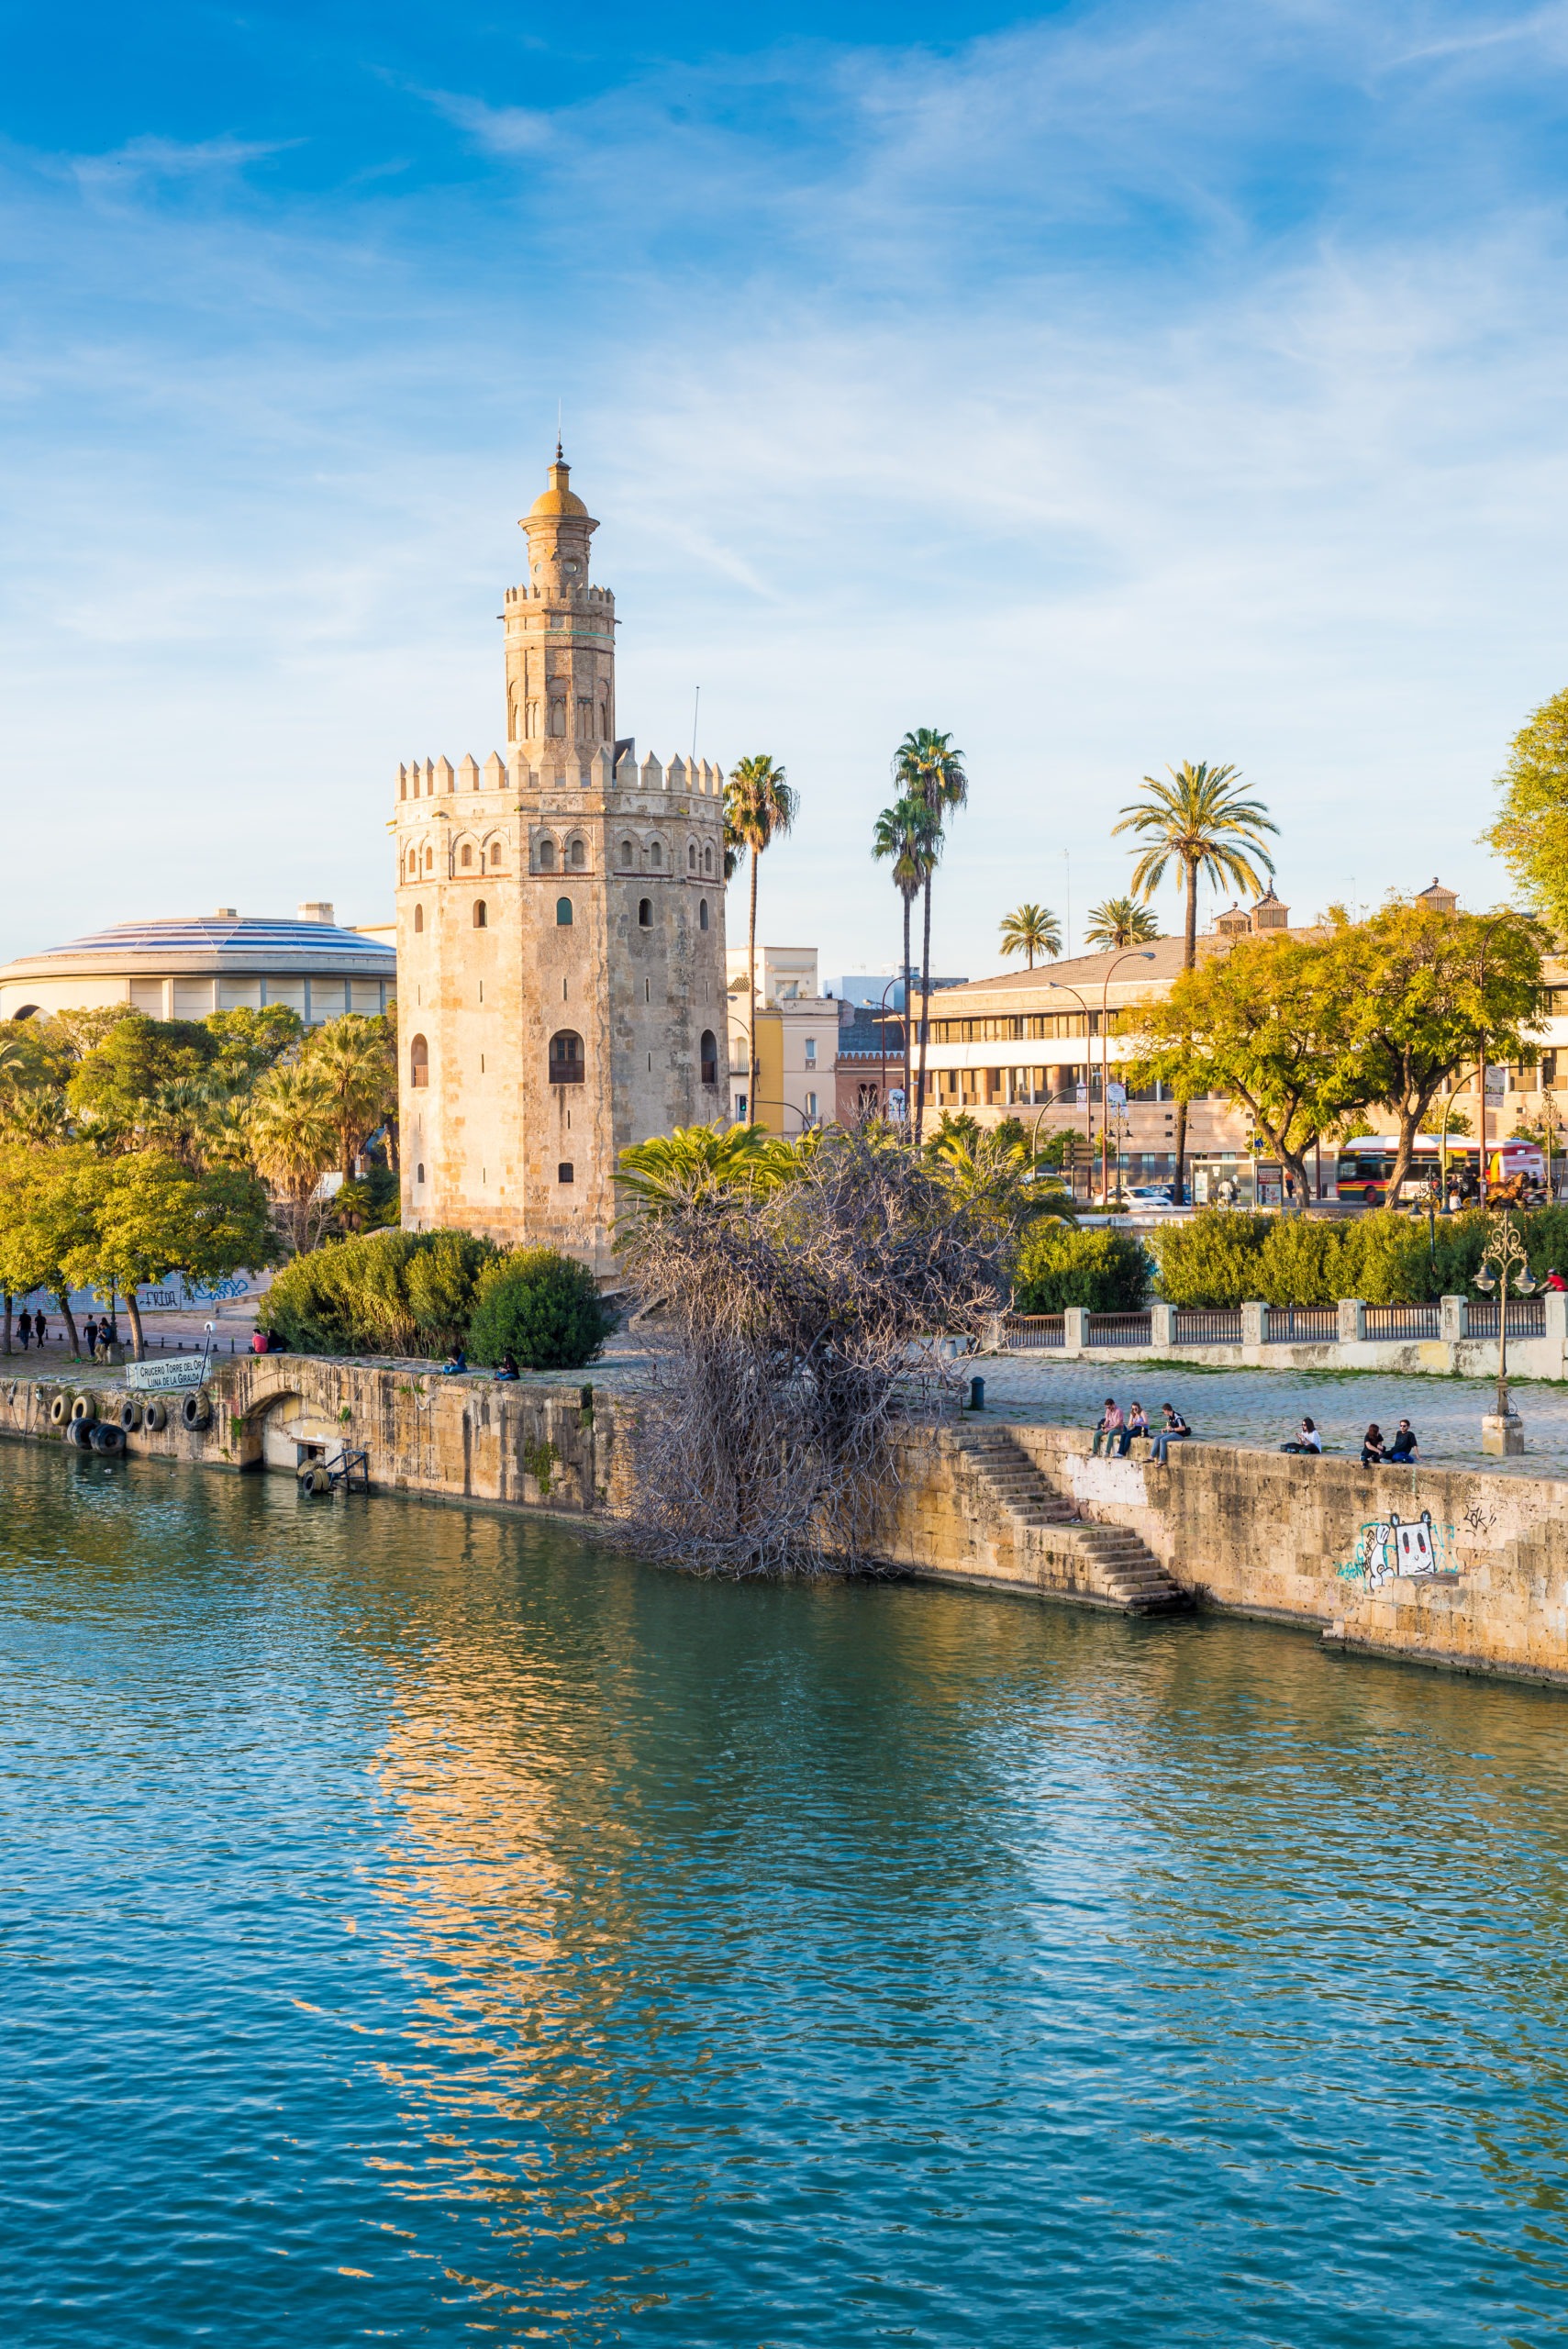 SEVILLE, ES - MARCH 7, 2017: The Torre del Oro in Seville is an albarrana tower located on the left bank of the Guadalquivir River. It houses the Naval Museum of Seville.